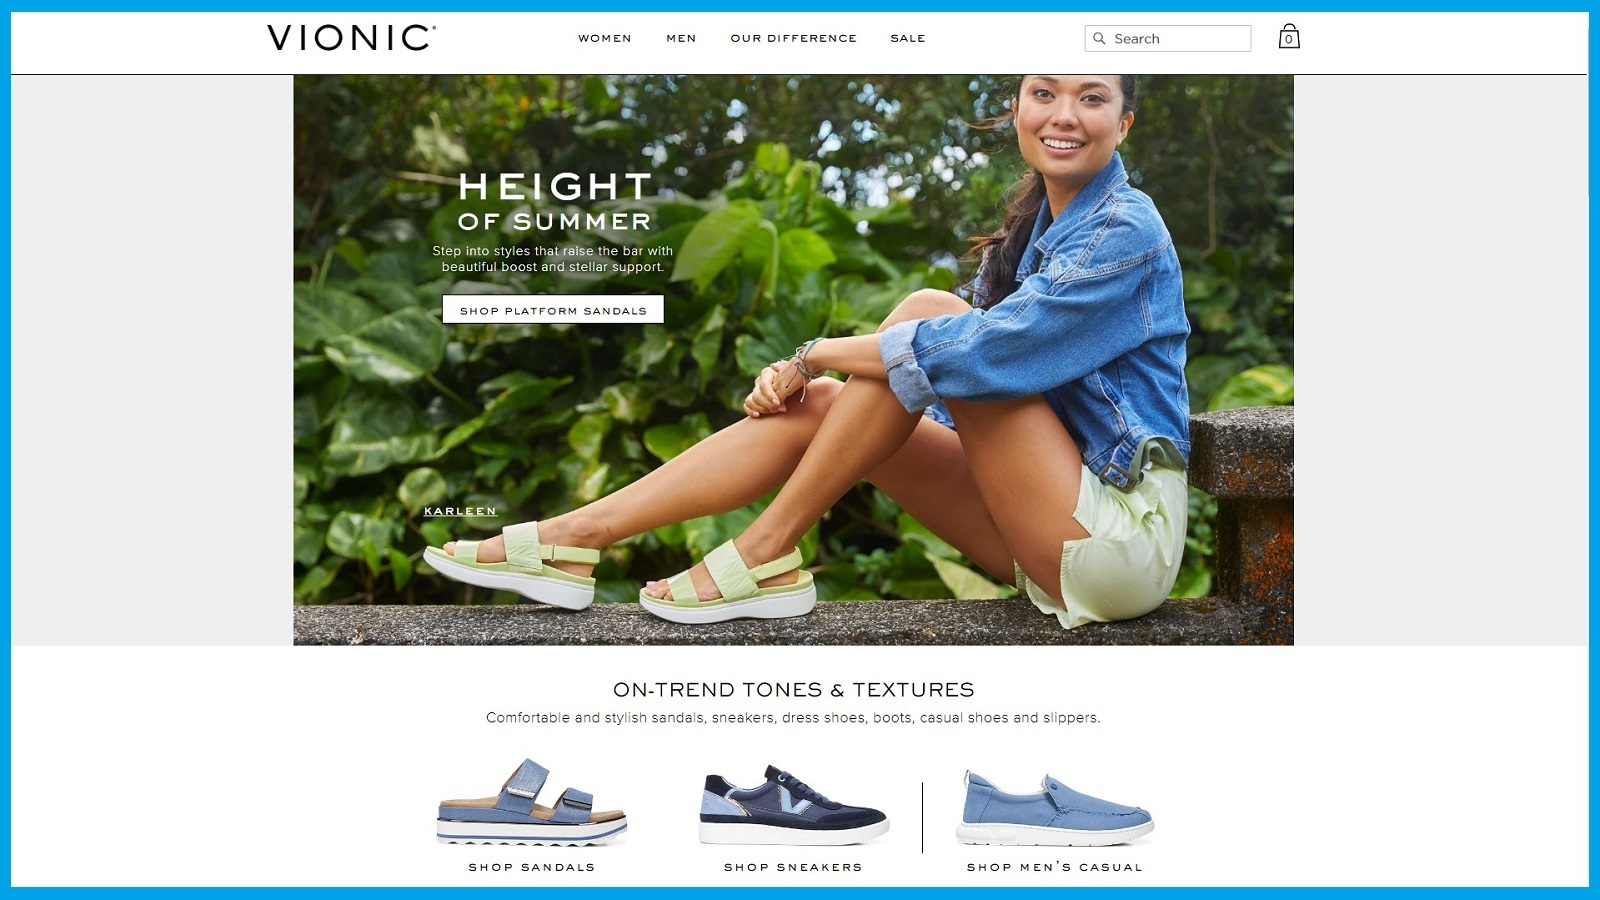 Vionic Shoes Review: What About Their Supportive?